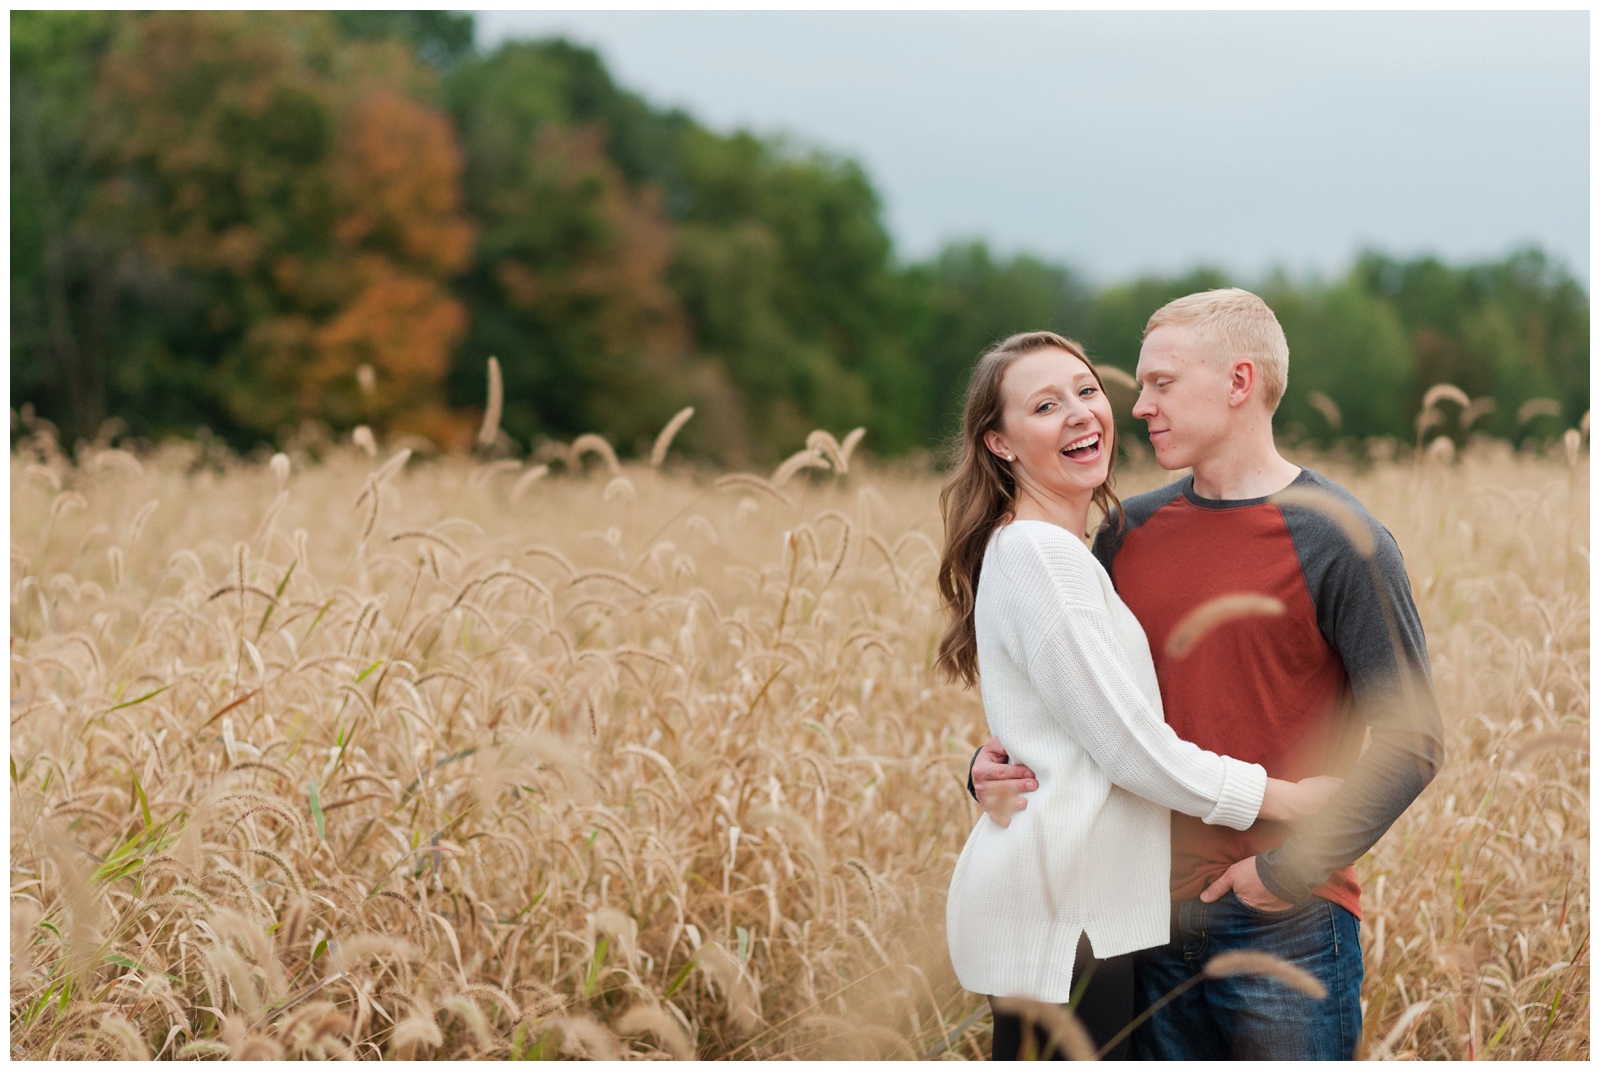 engaged girl laughing at the camera while engaged man looks at her Country Engagement Session Sunbury Ohio